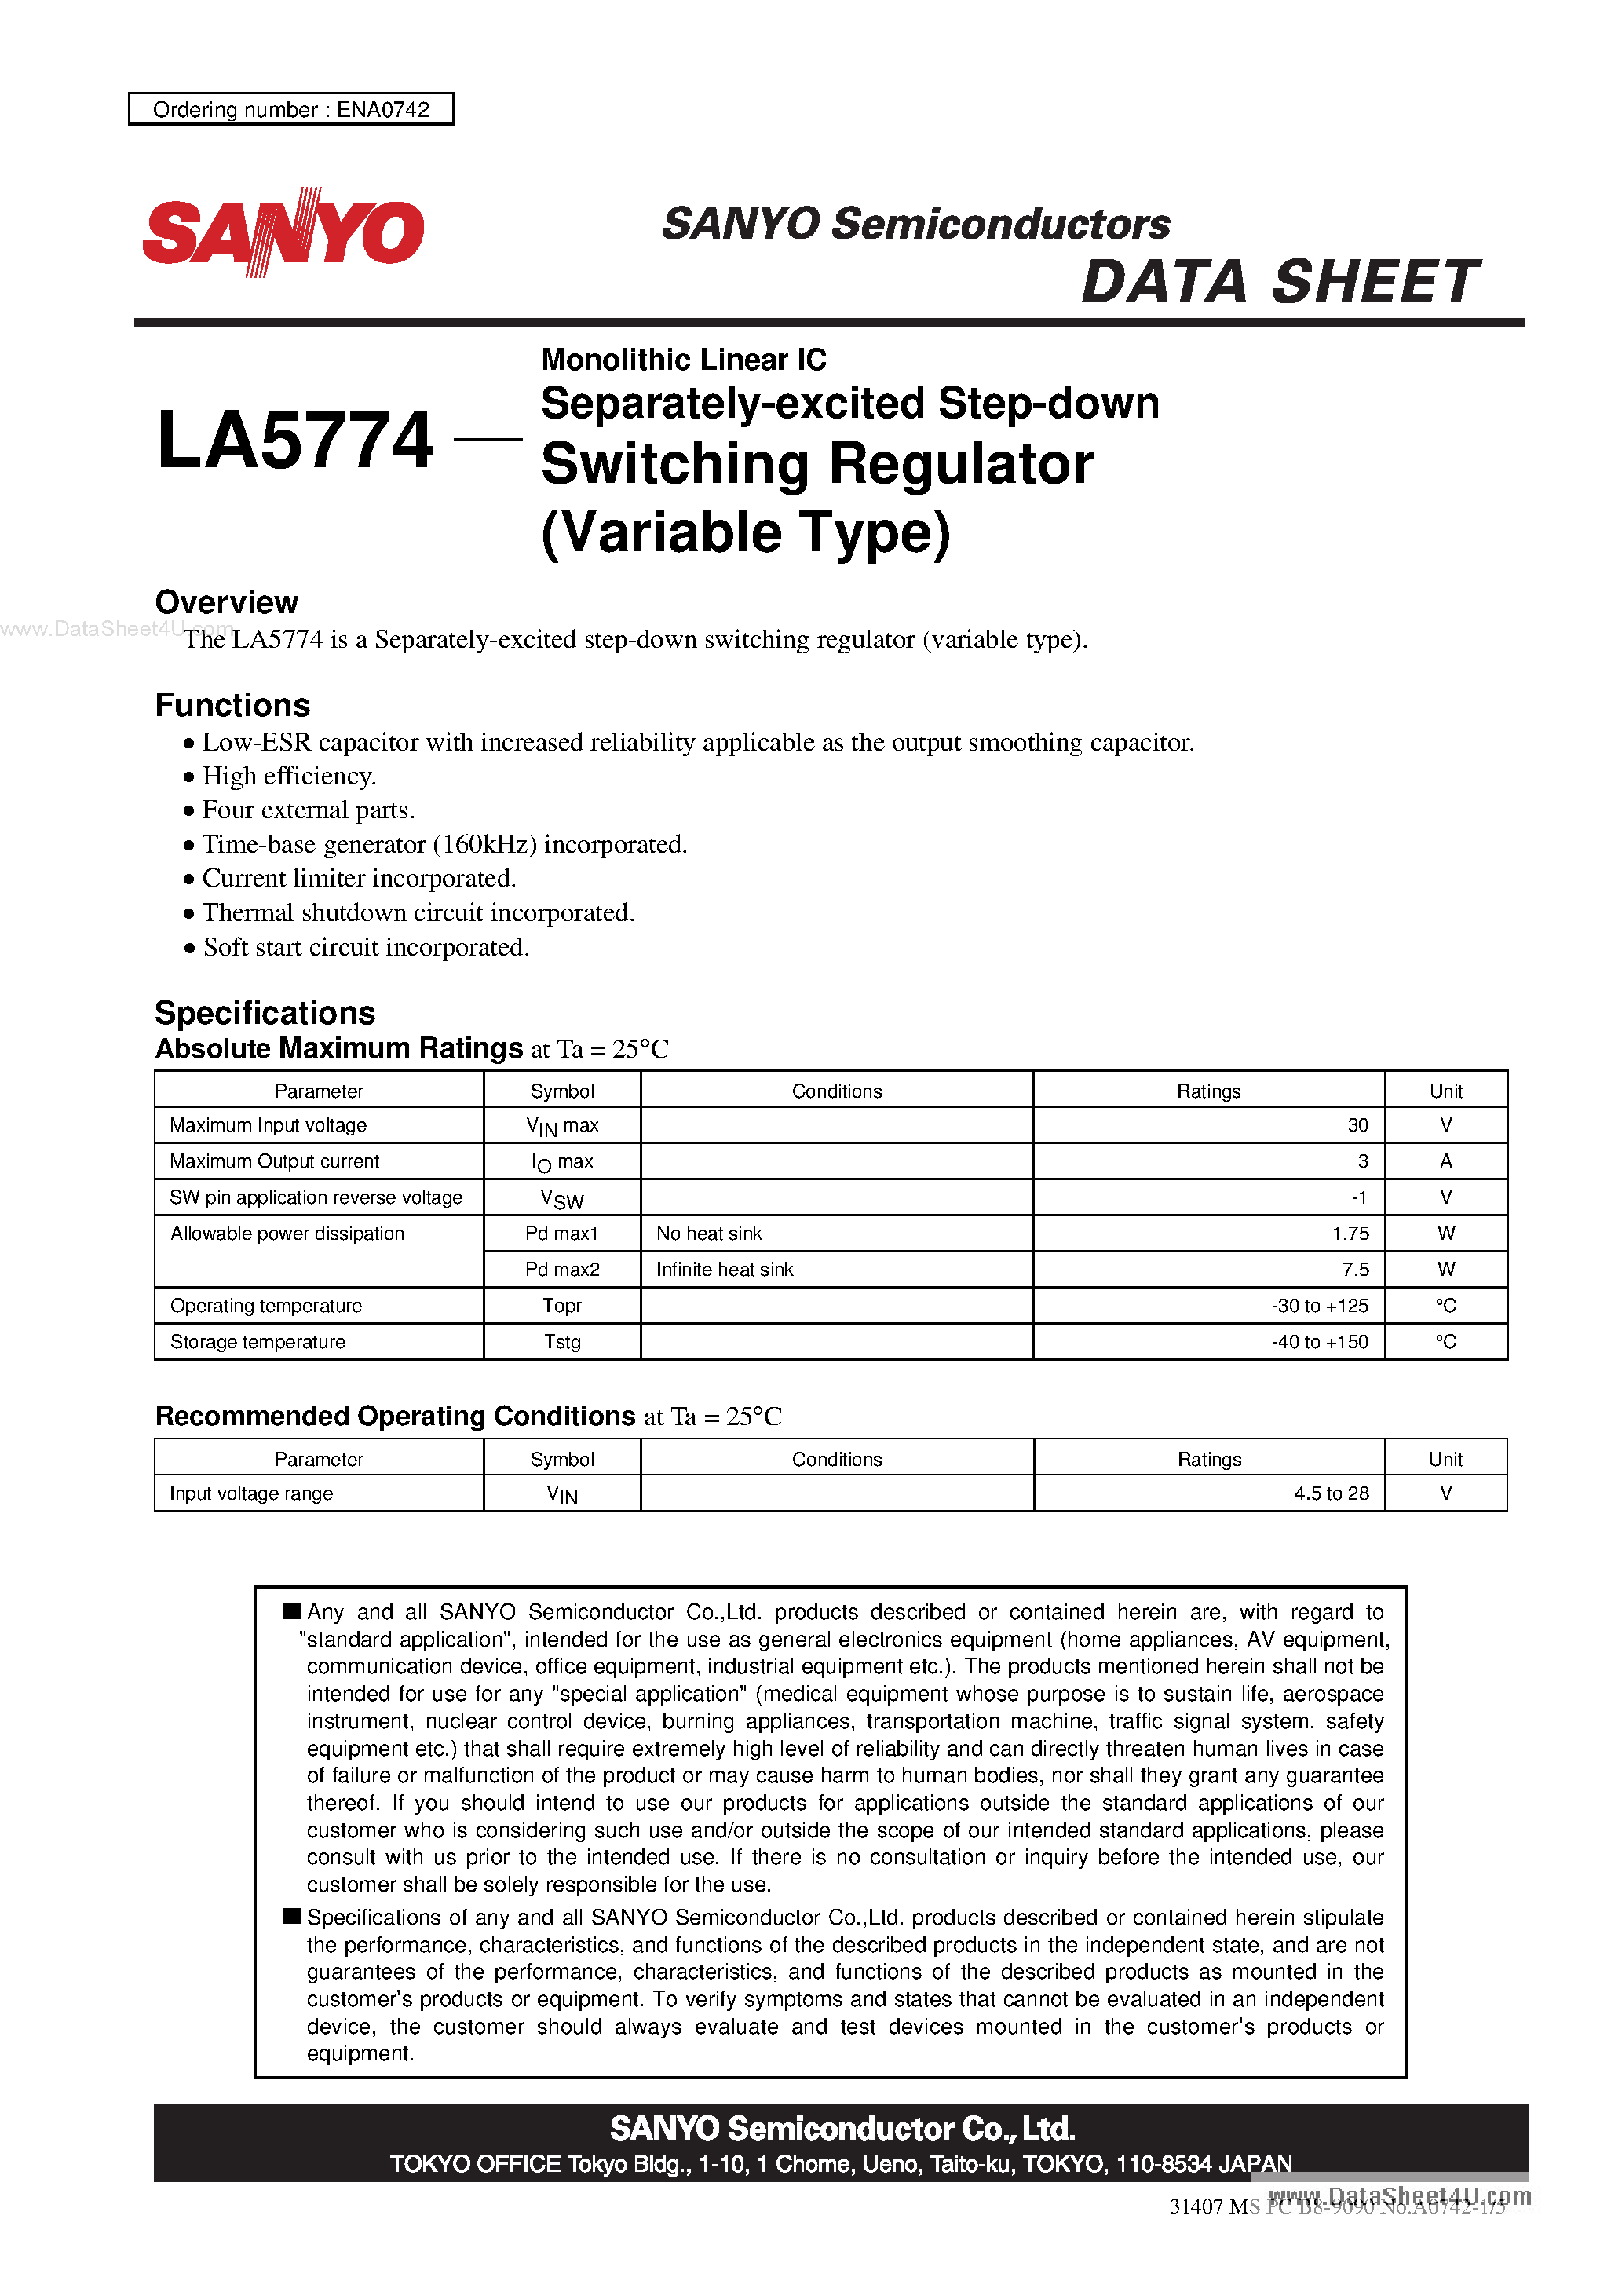 Datasheet LA5774 - Monolithic Linear IC Separately-Excited Step-Down Switching Regulator page 1